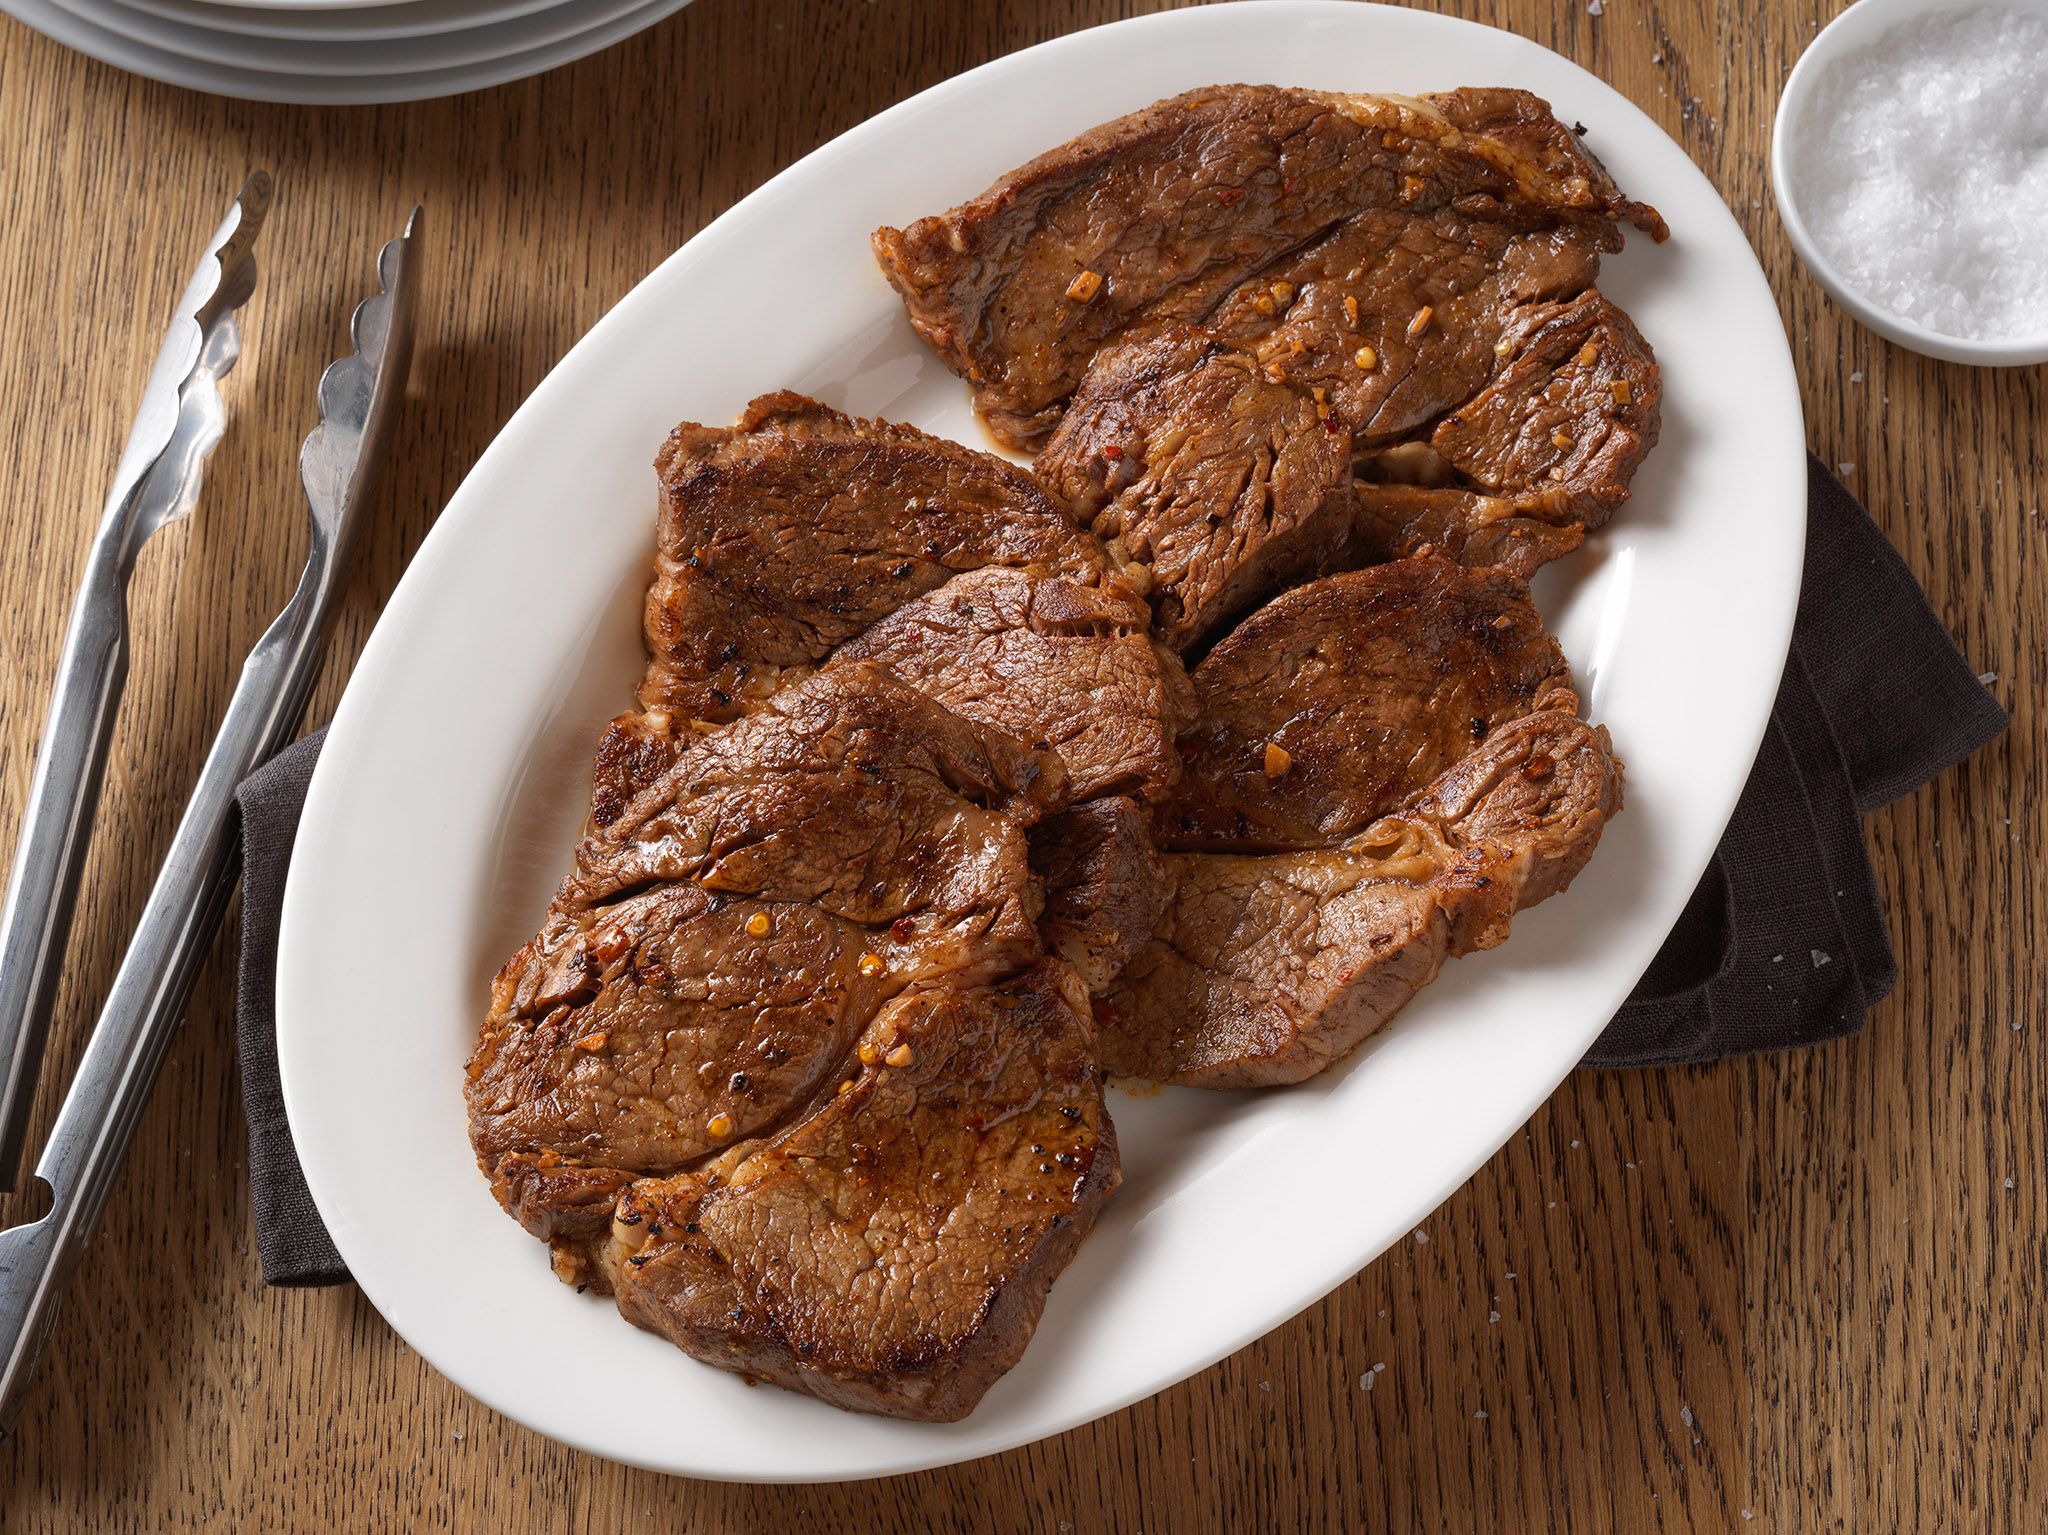 Beef Chuck Steak Recipes - How to Cook Thin Chuck Steak | LIVESTRONG.COM : Marinating the meat ...